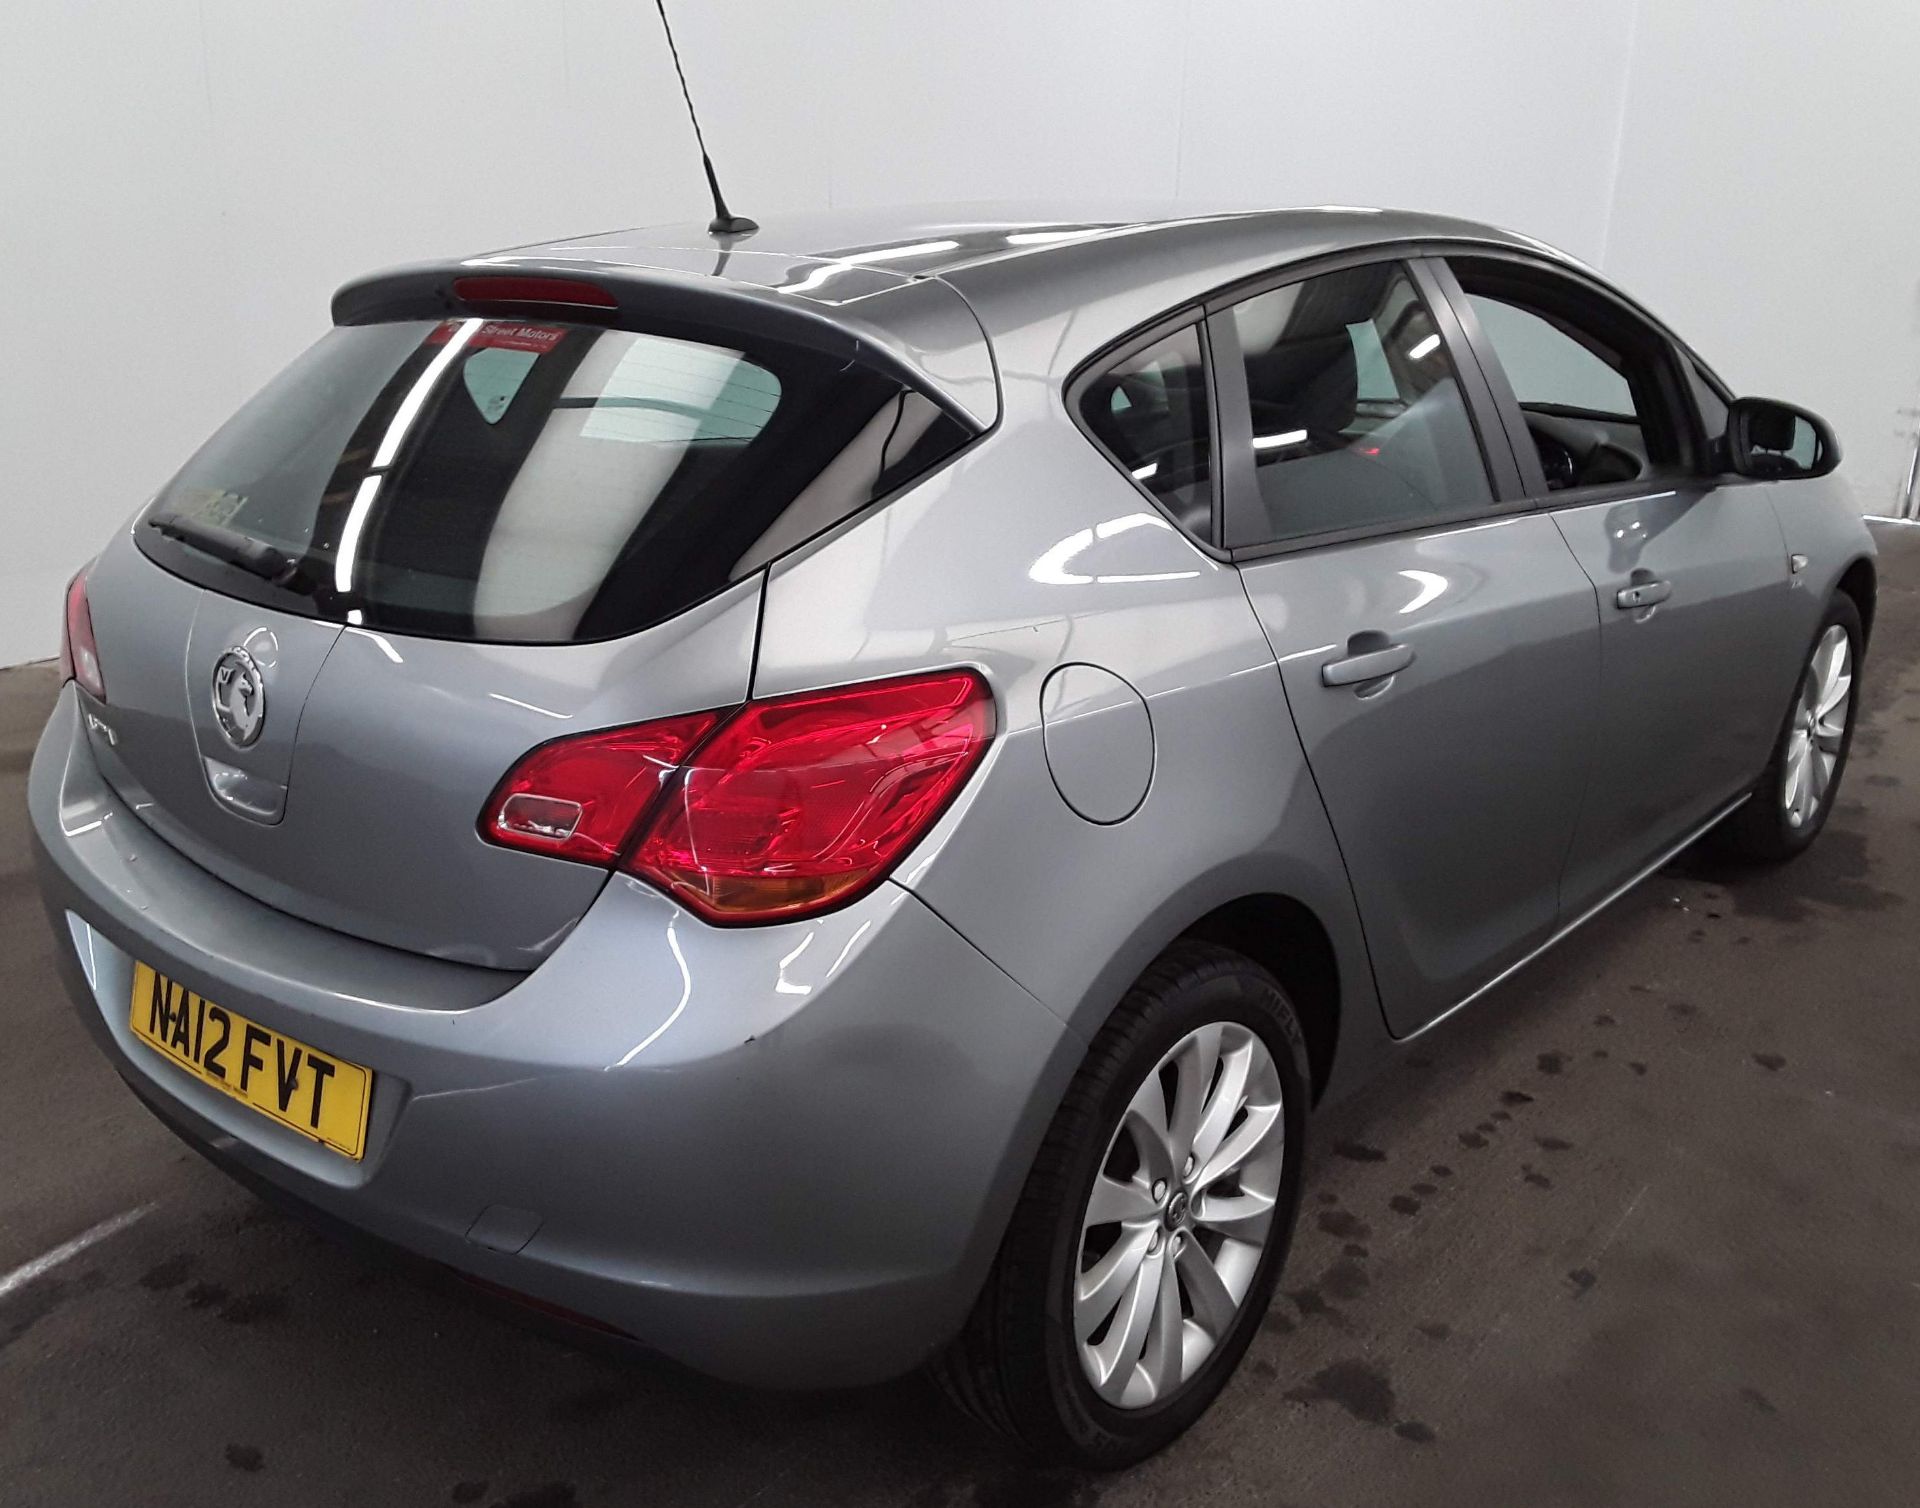 2012 Vauxhall Astra 1.4 Active 5 Door Hatchback - CL505 - NO VAT ON THE HAMMER - Location: Corby, - Image 5 of 11